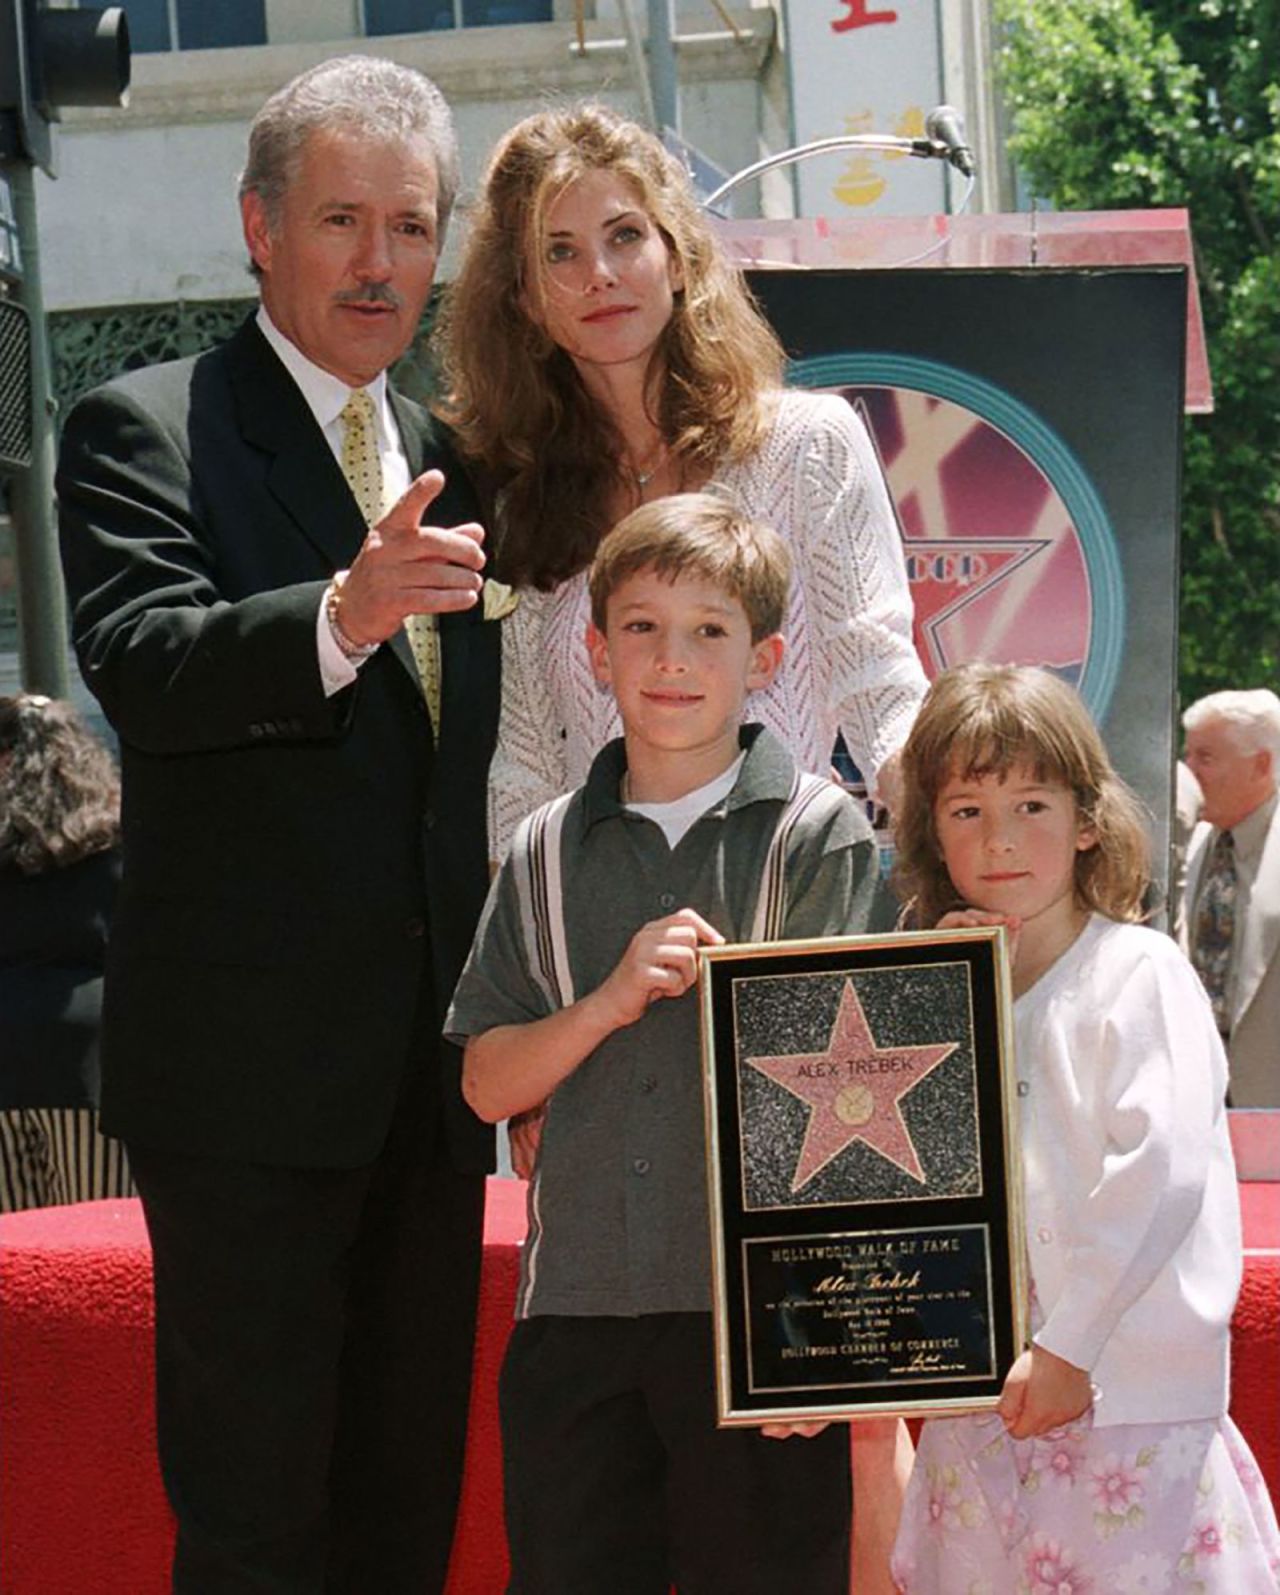 Trebek poses with his wife, Jean, and children Matthew and Emily after unveiling his star on the Hollywood Walk of Fame in May 1999.